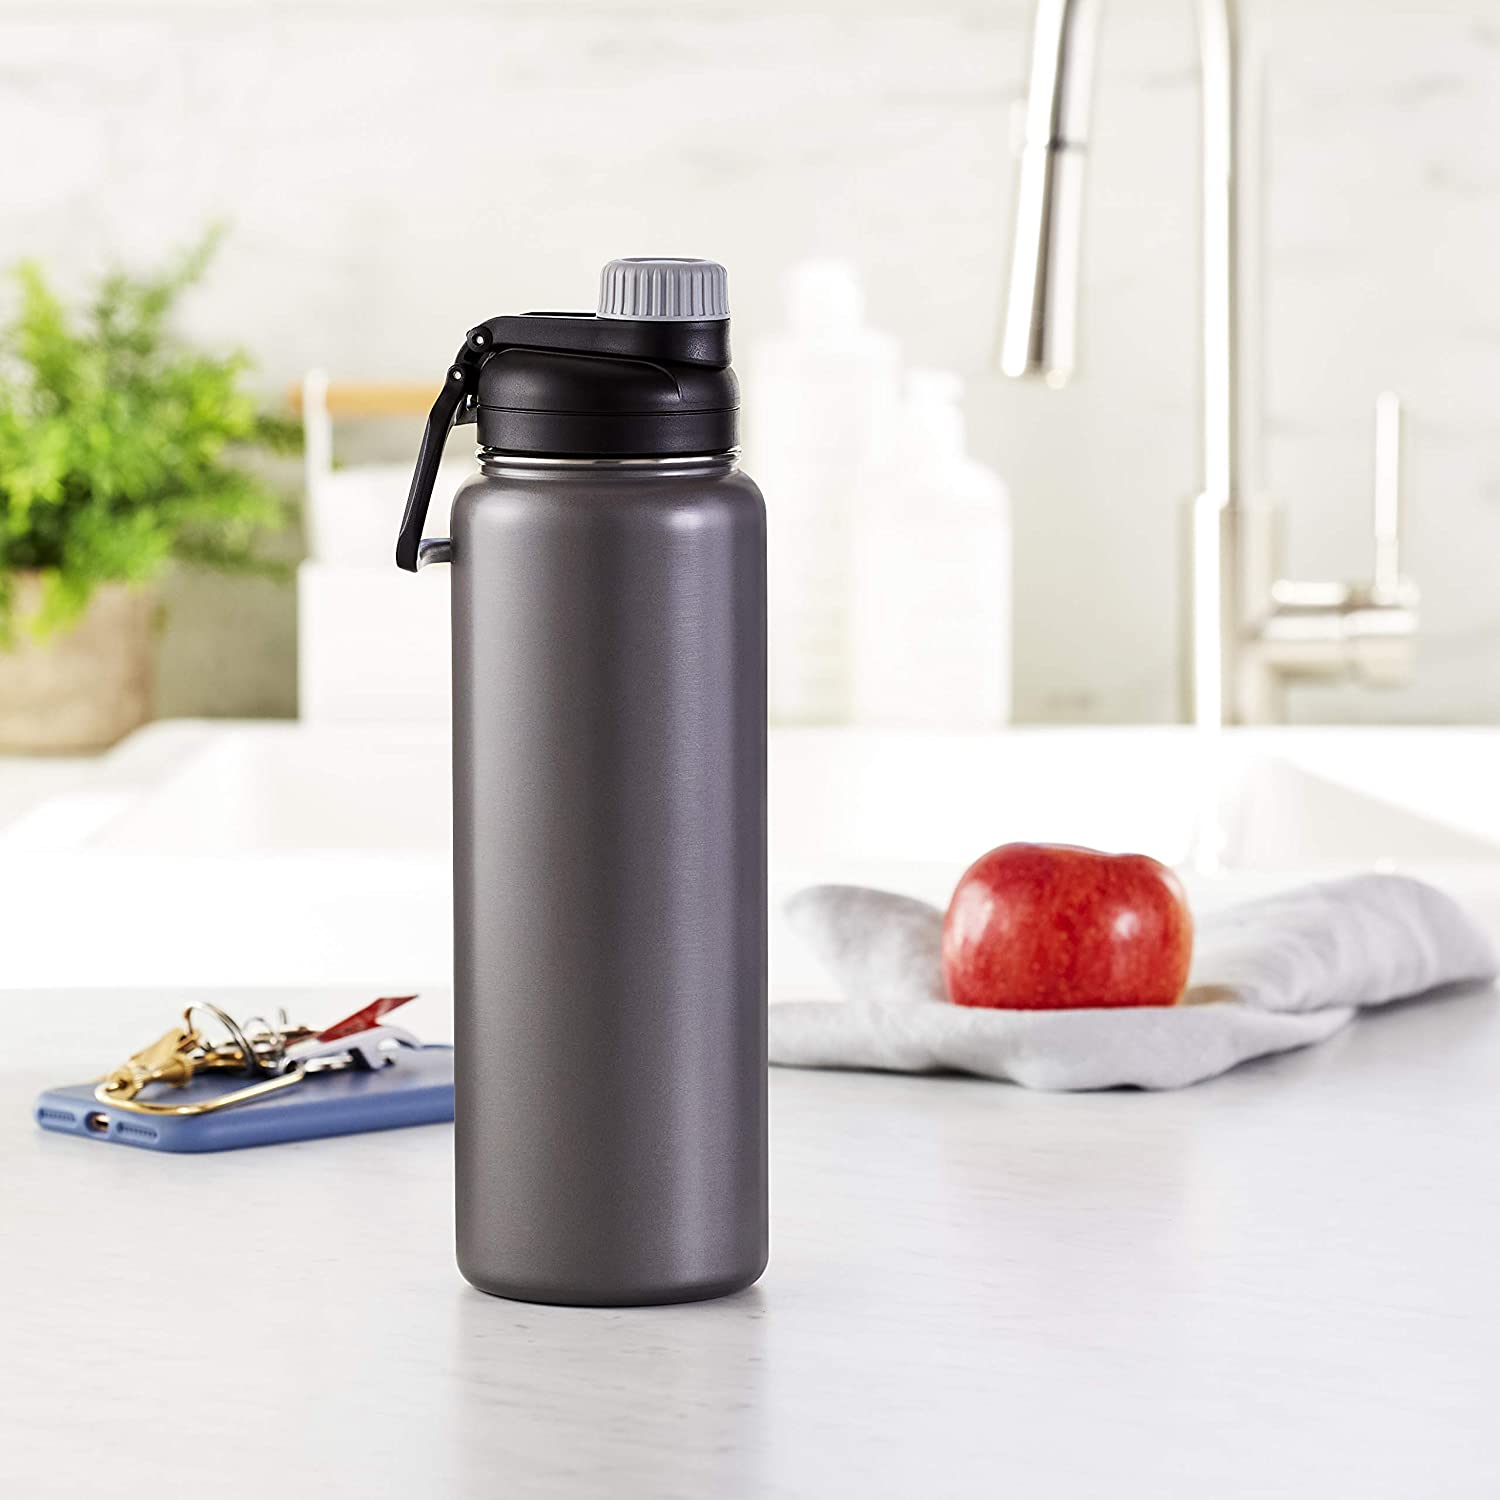 Amazon Basics Stainless Steel Insulated Water Bottle with Spout Lid